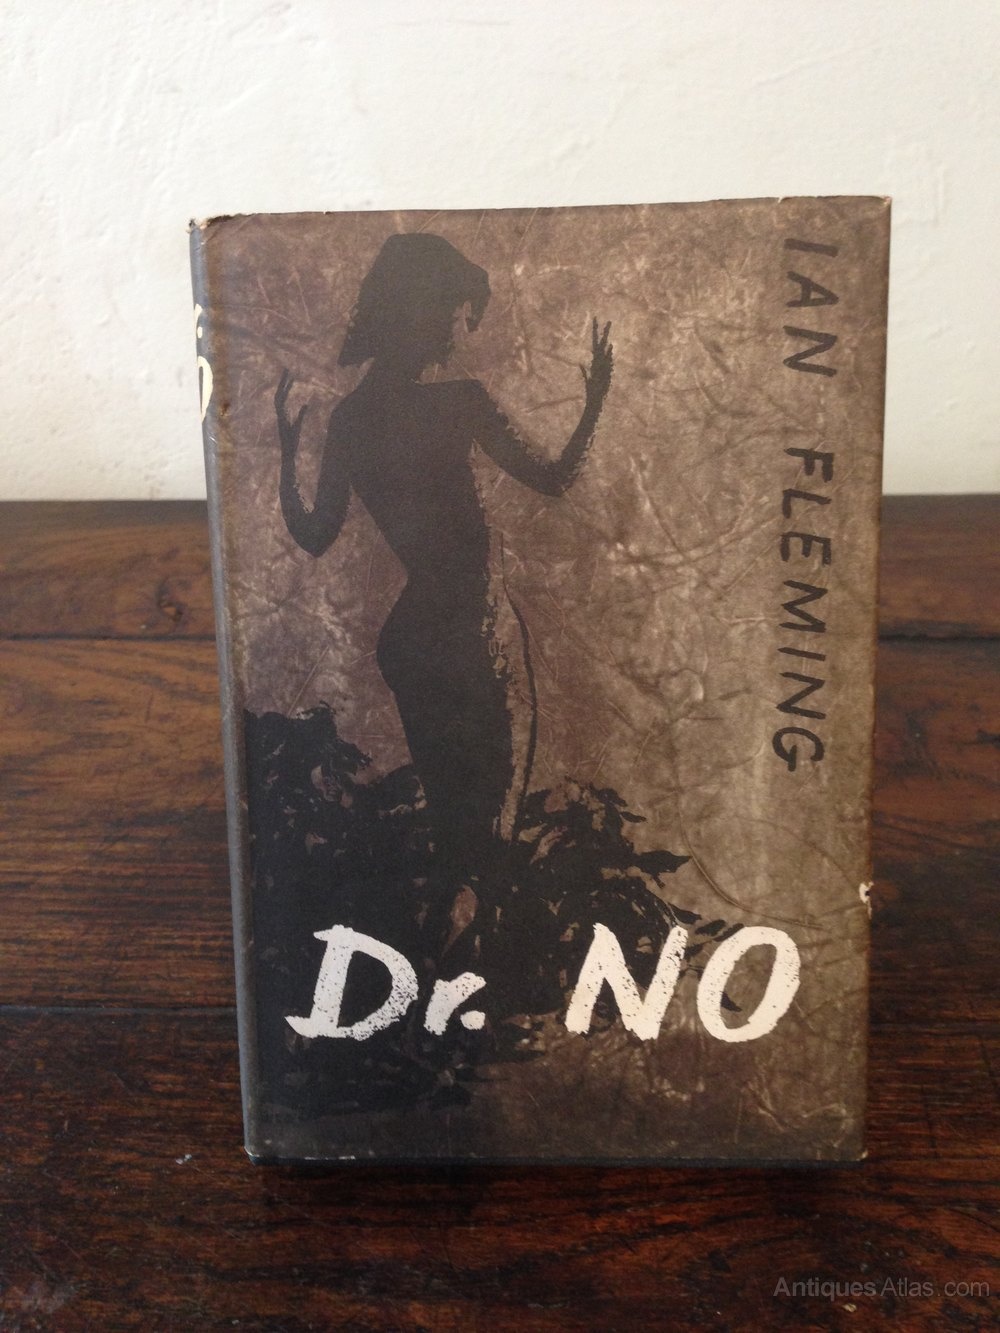 First_edition_Dr_No_by_Ian_Fle_as816a055z-1.jpg